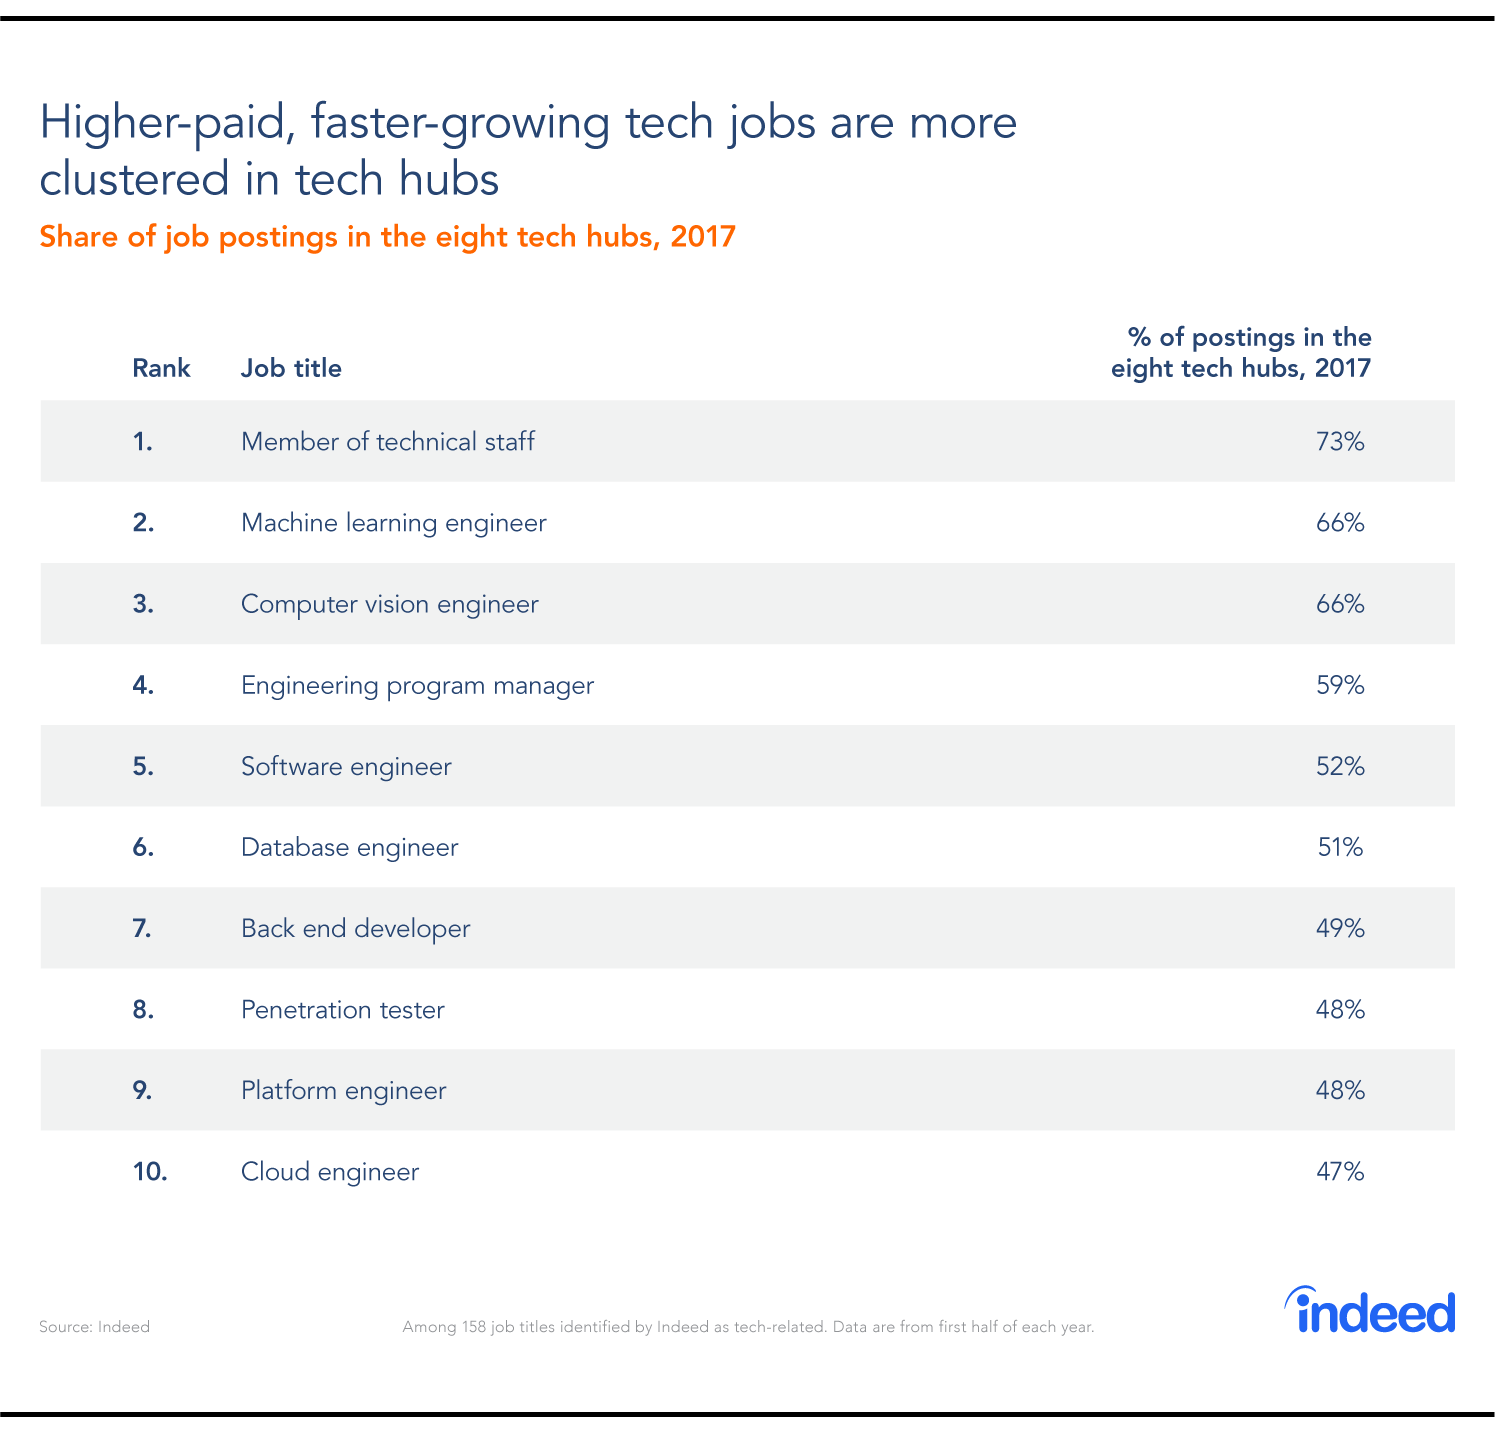 Higher-paid, faster-growing tech jobs are more clustered in tech hubs